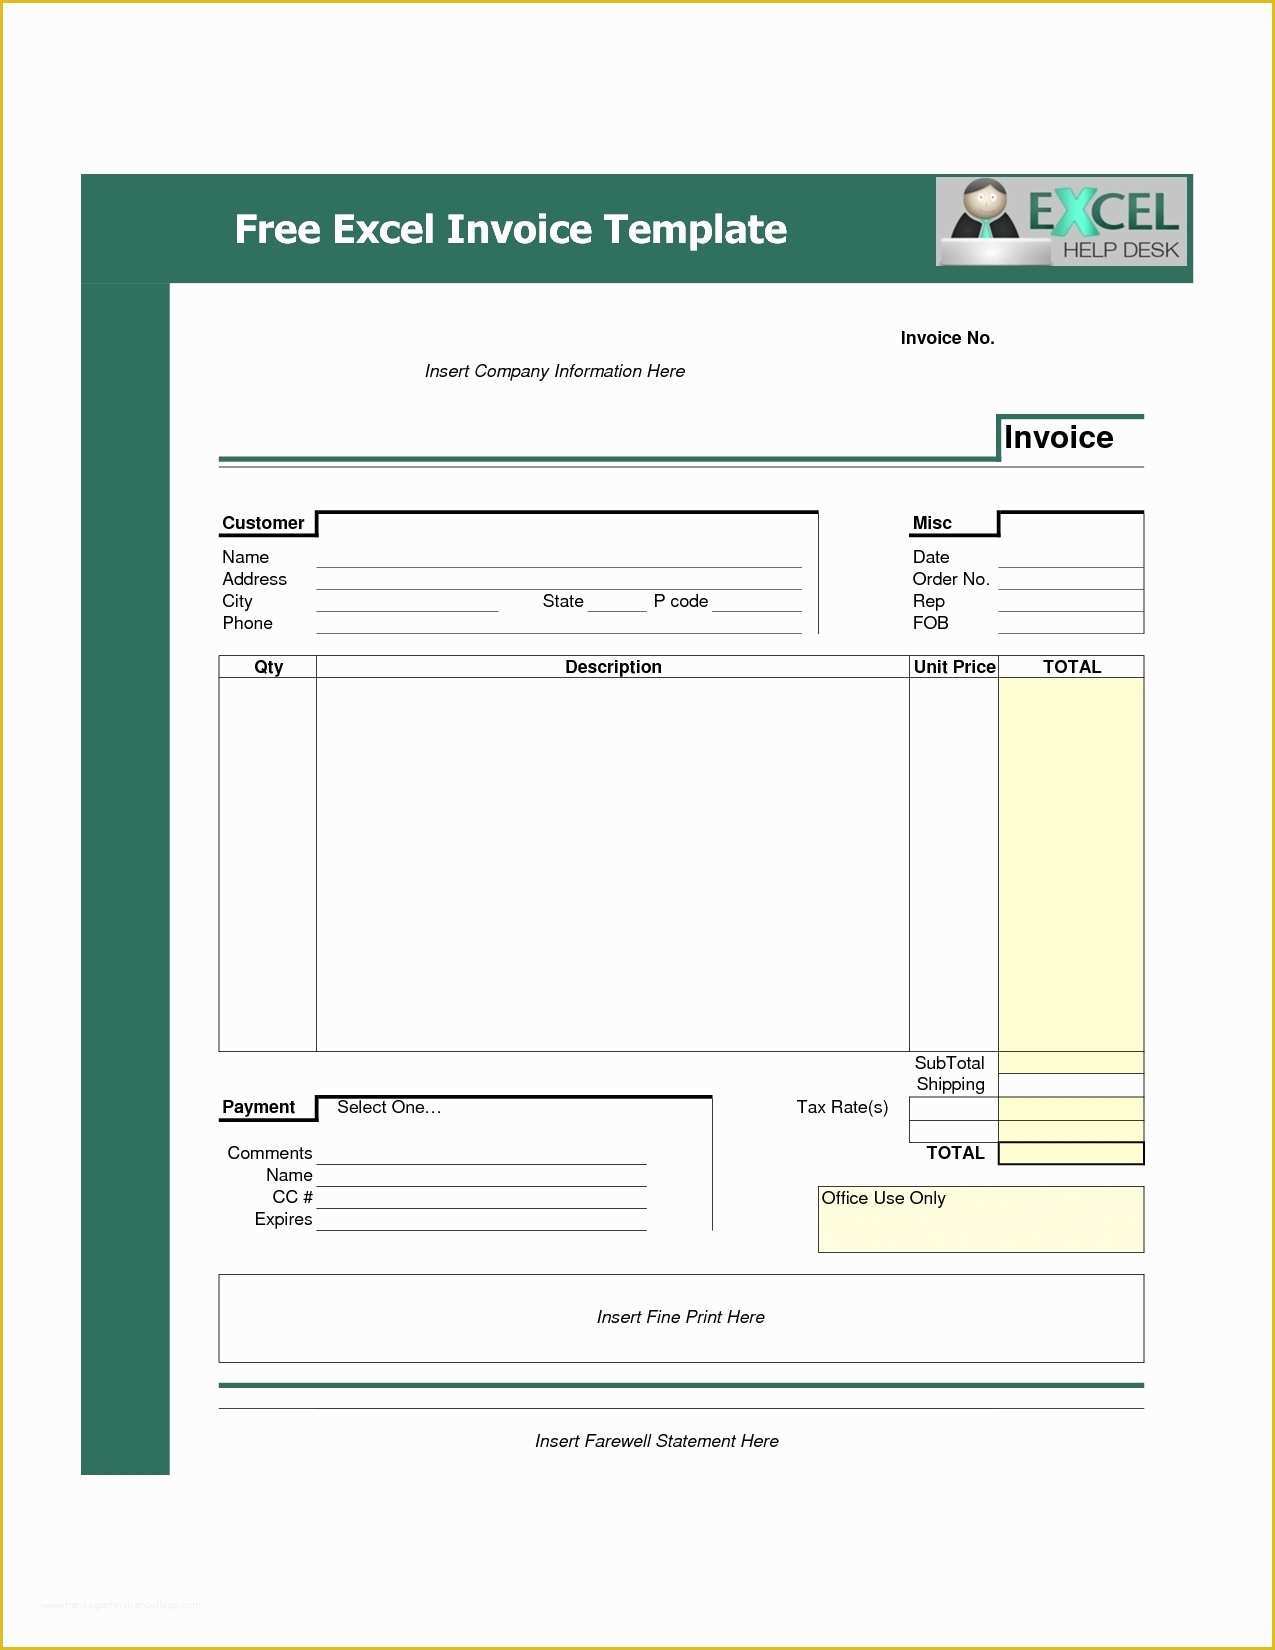 Basic Invoice Template Free Of Invoice Template Free Download Excel Invoice Template Ideas